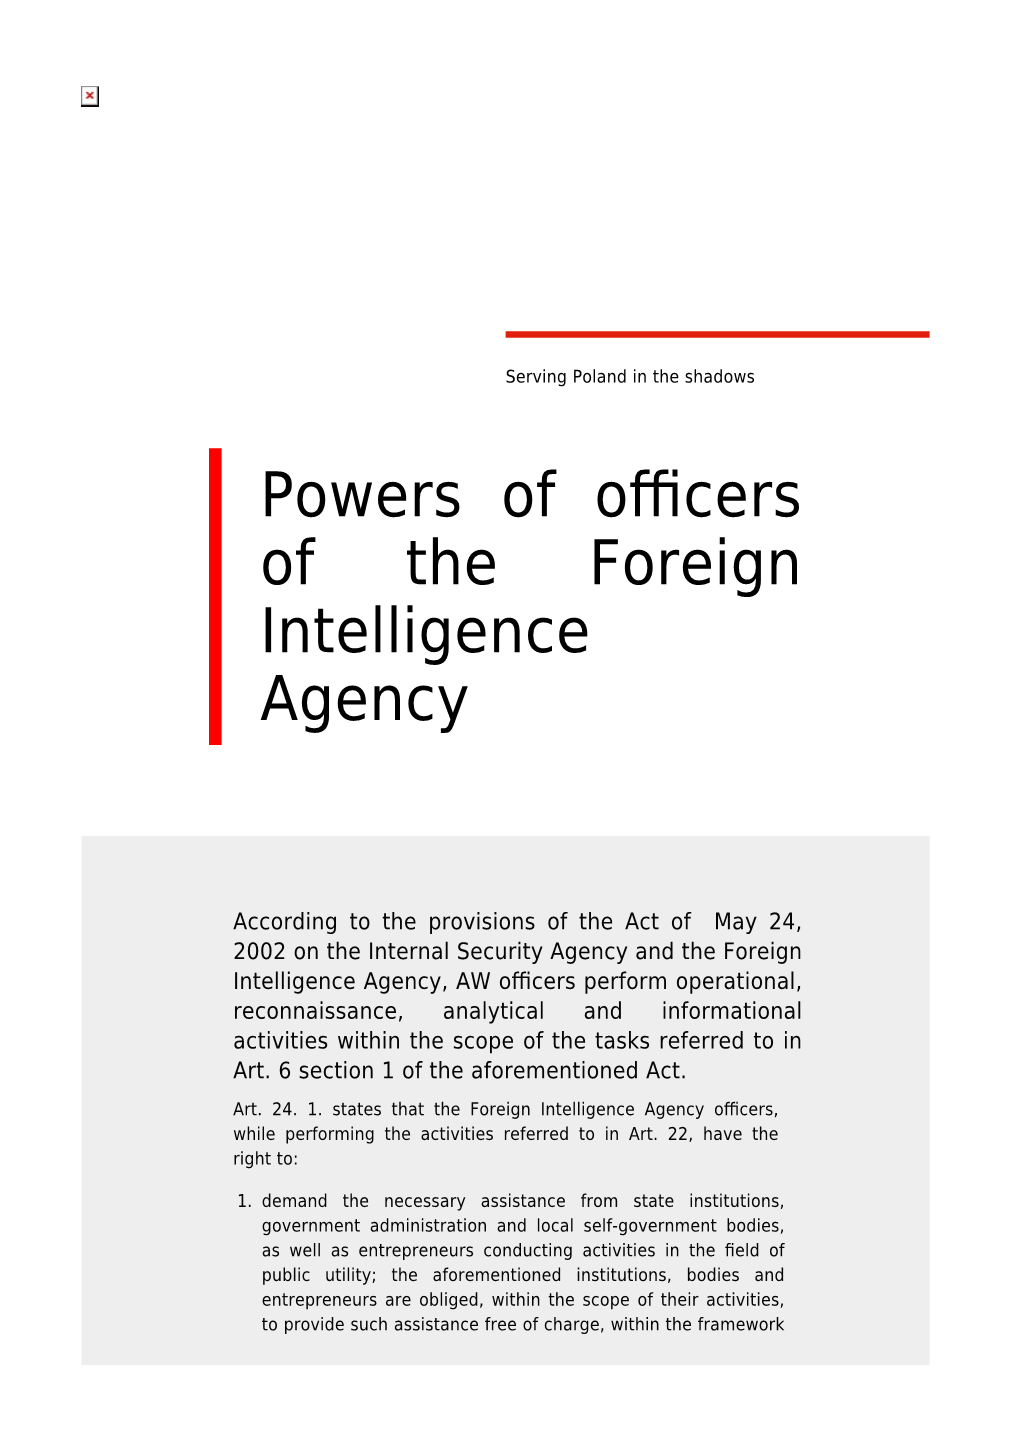 Foreign Intelligence Agency